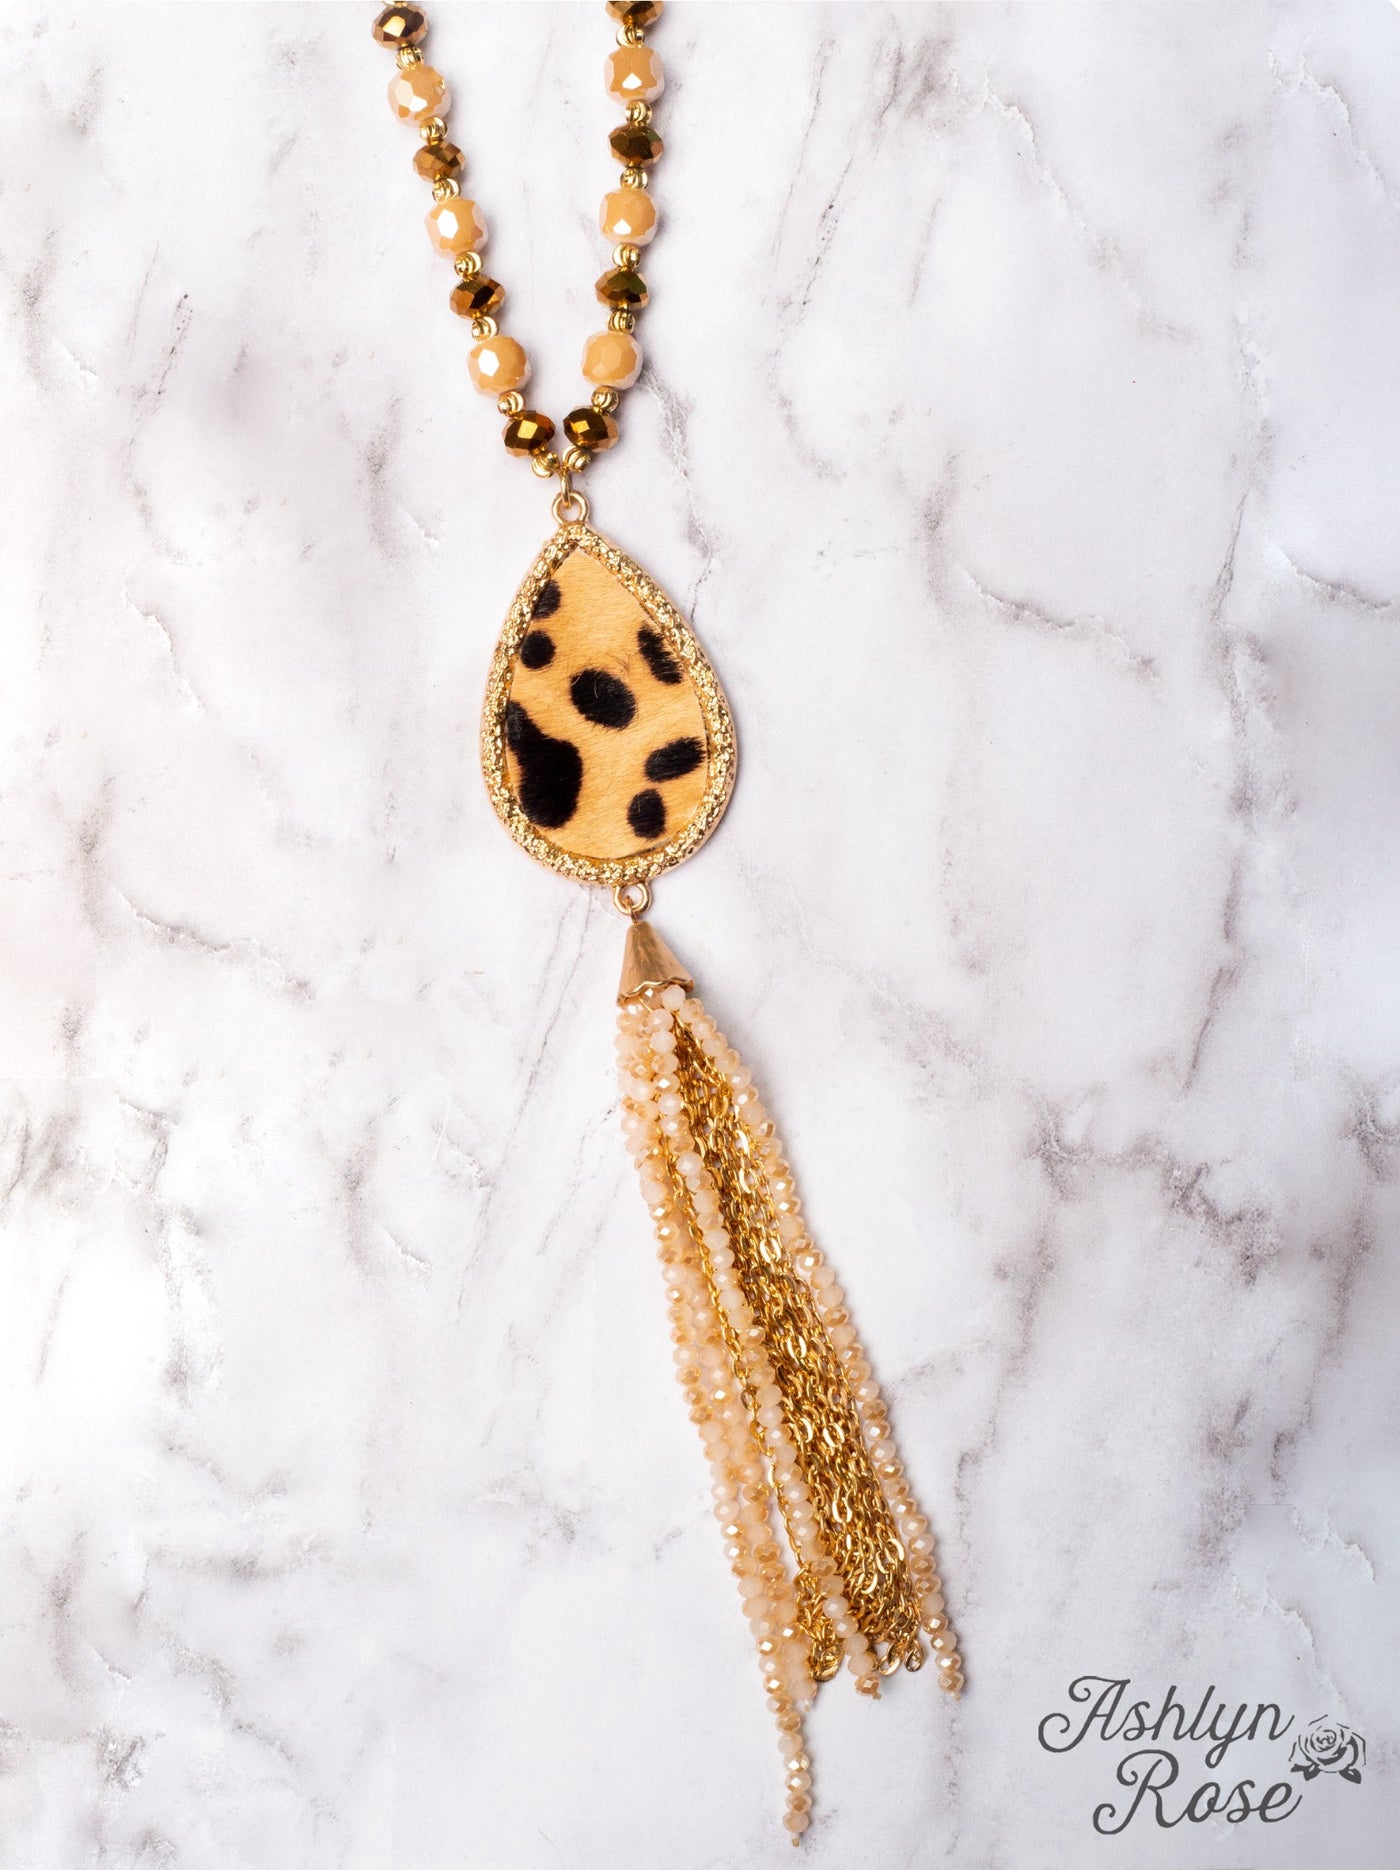 DON'T UNDERESTIMATE ME LEOPARD PENDANT WITH BEIGE BEADED TASSELS ON A CRYSTAL GOLD CHAIN NECKLACE